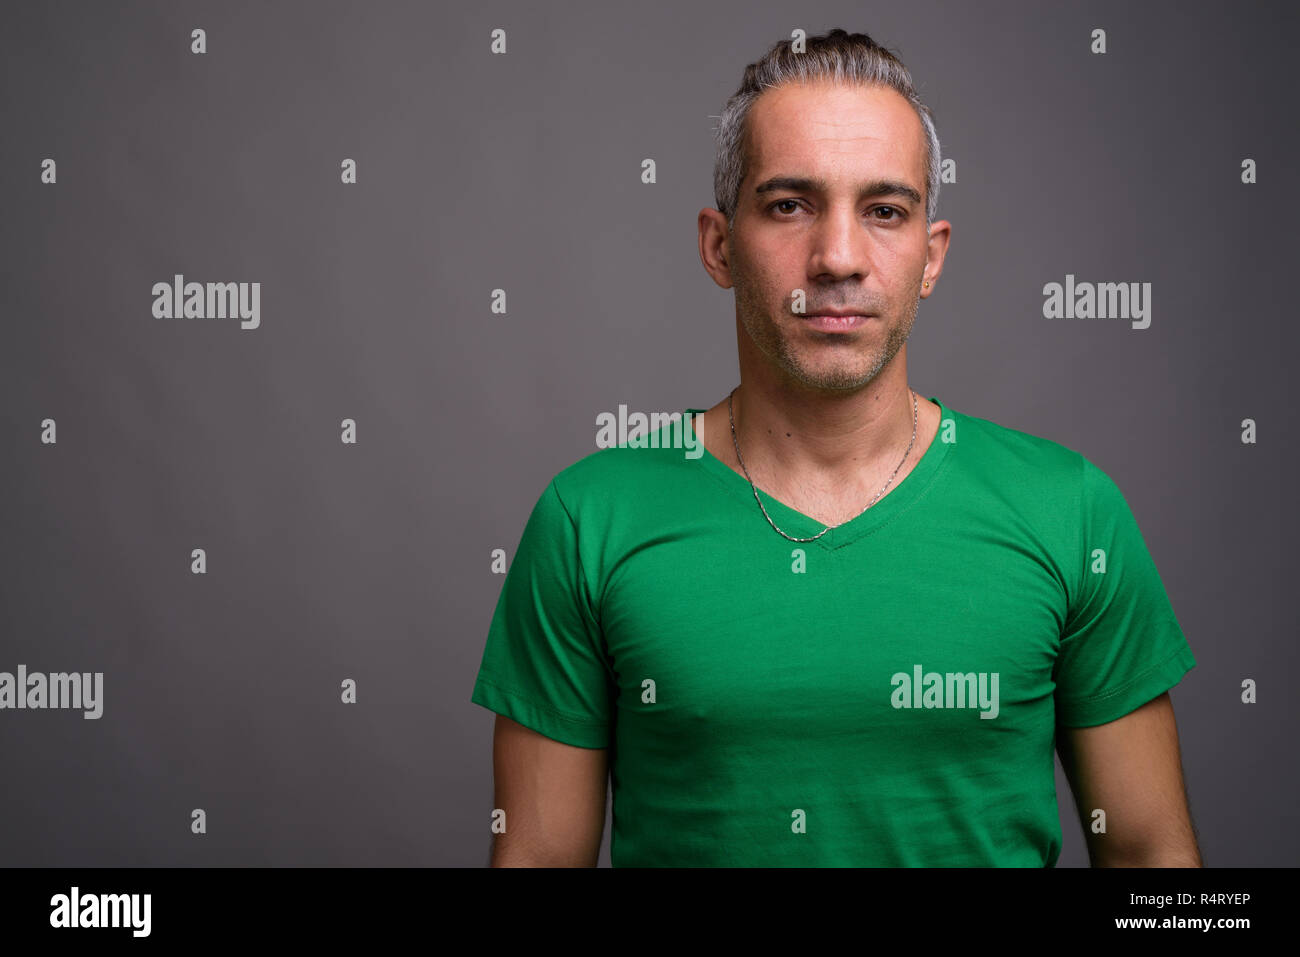 Handsome Persian man with gray hair wearing green t-shirt Stock Photo